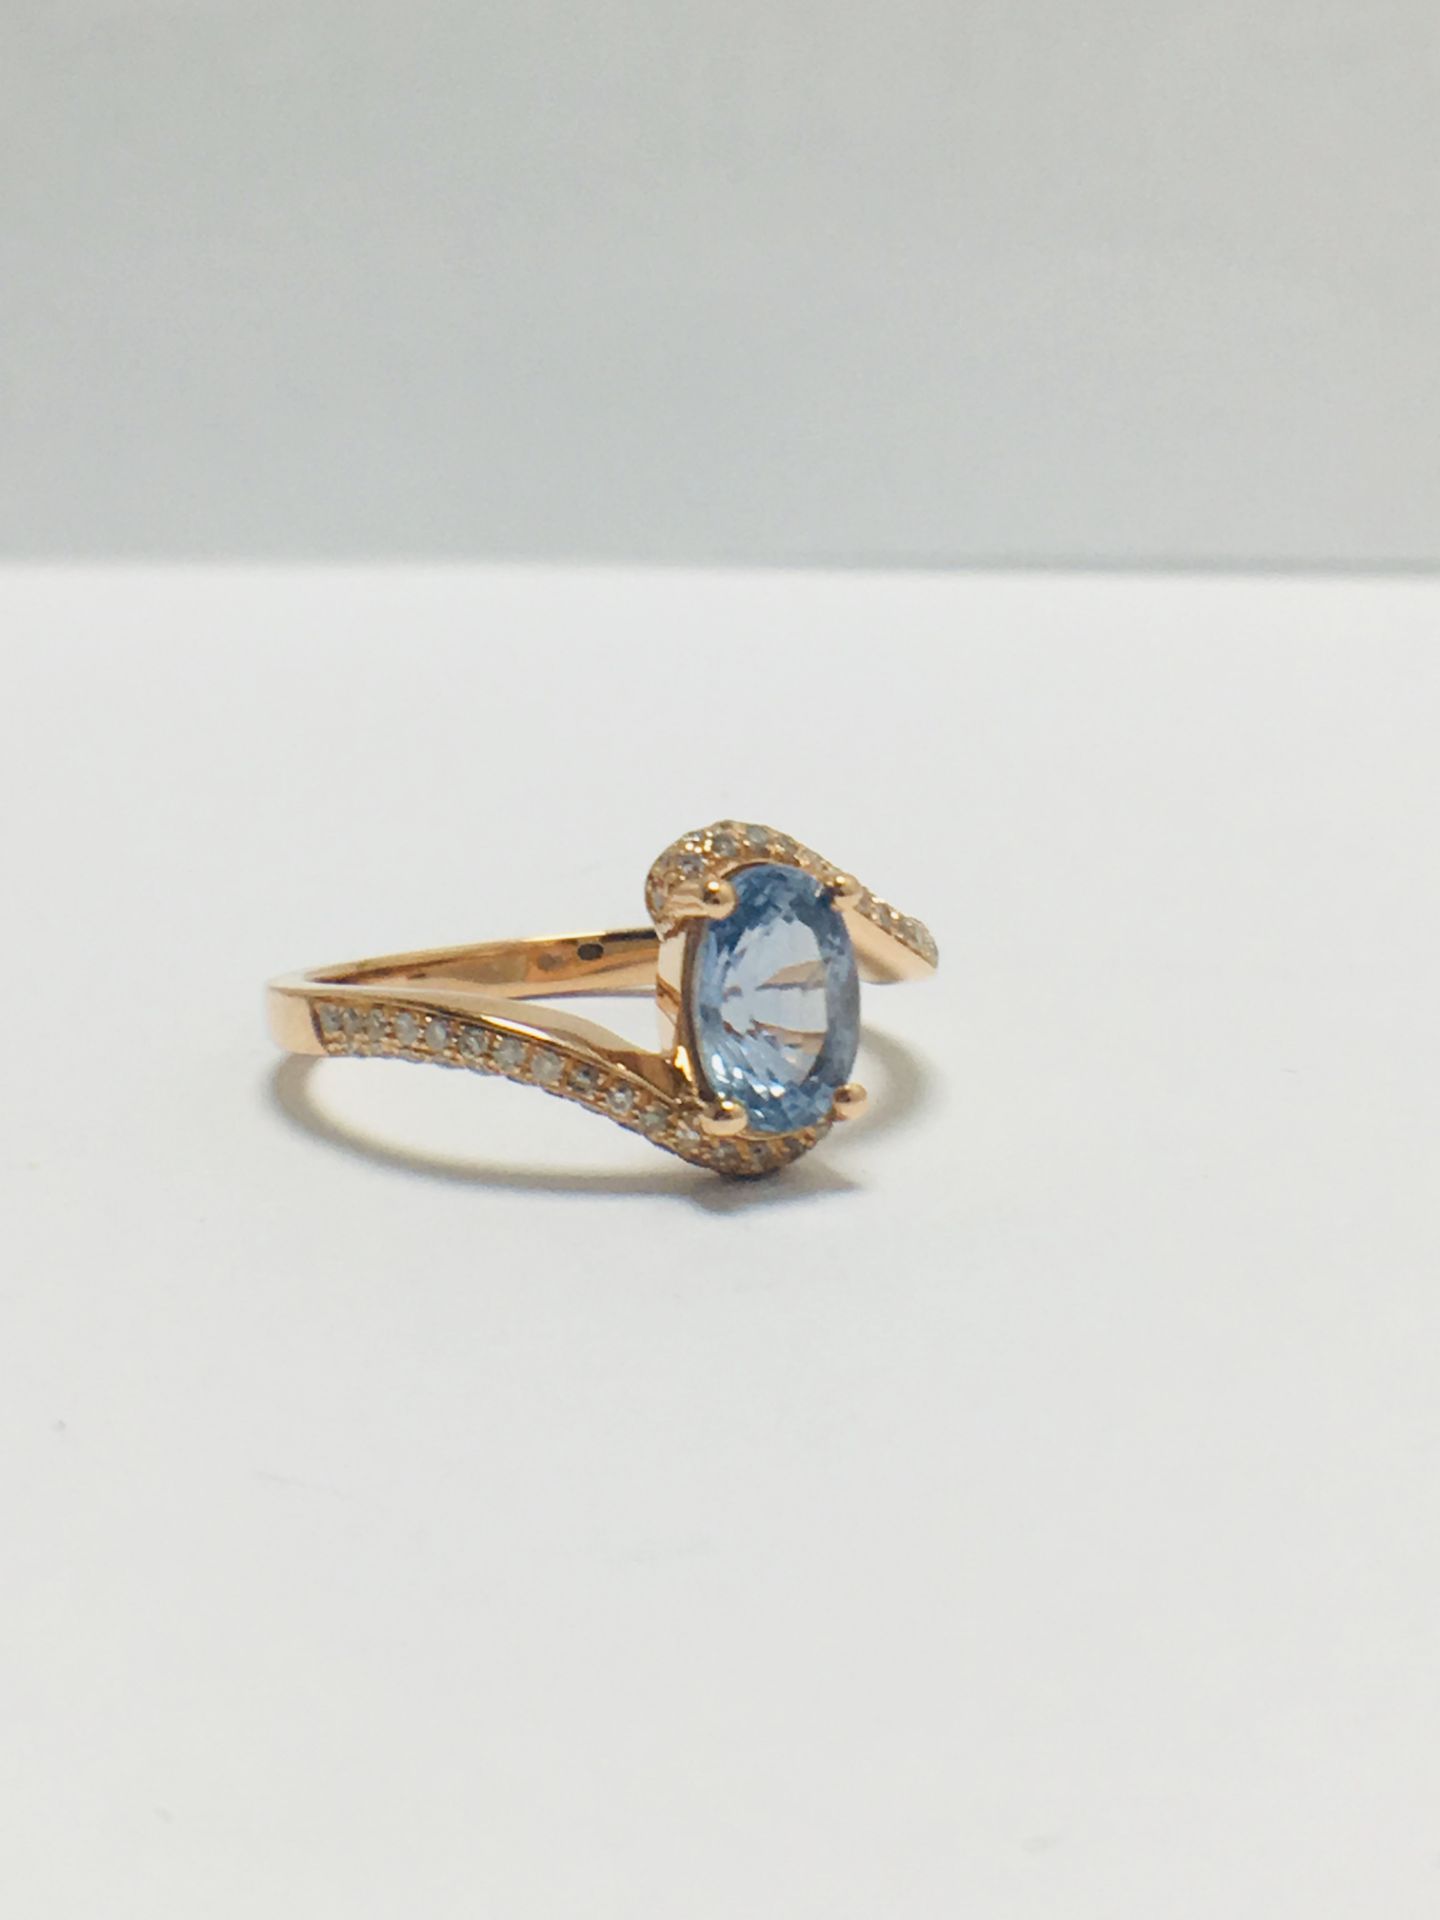 14ct rose gold sapphire and diamond ring - Image 6 of 9